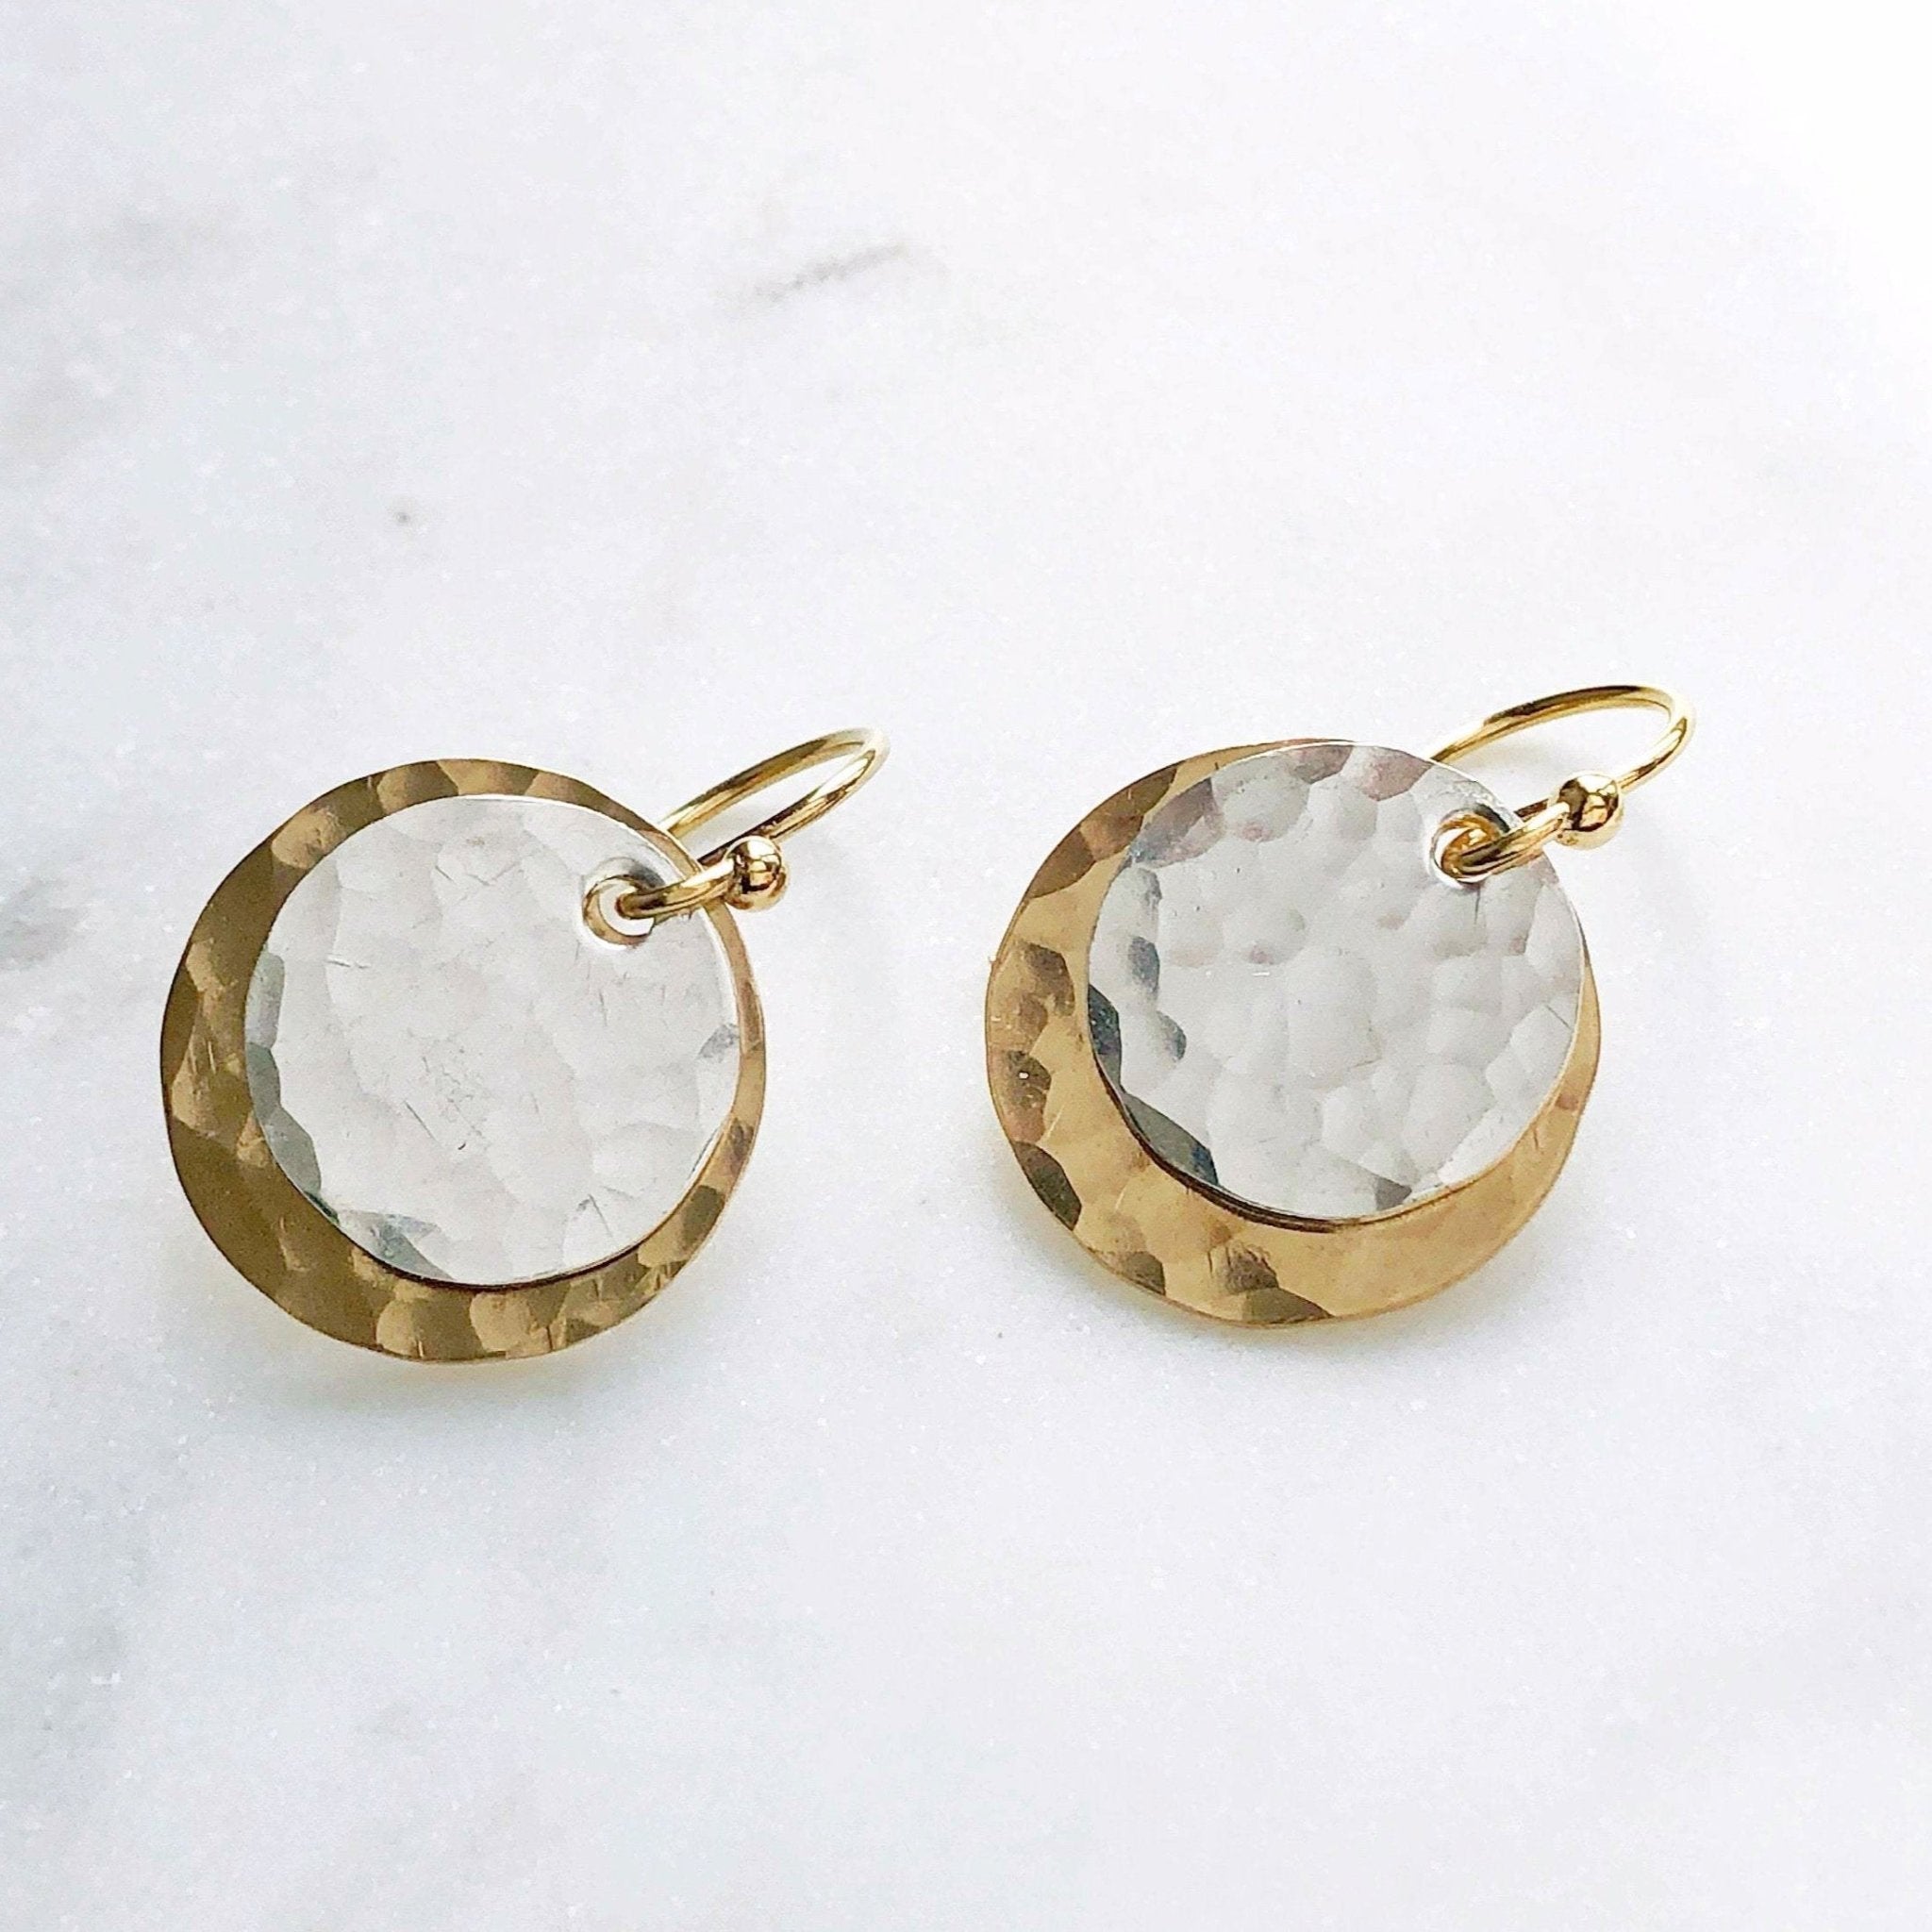 Eleanor Earrings by Sarah Cornwell Jewelry.  Two toned gold and silver mixed metal textured circle earrings on a white background.